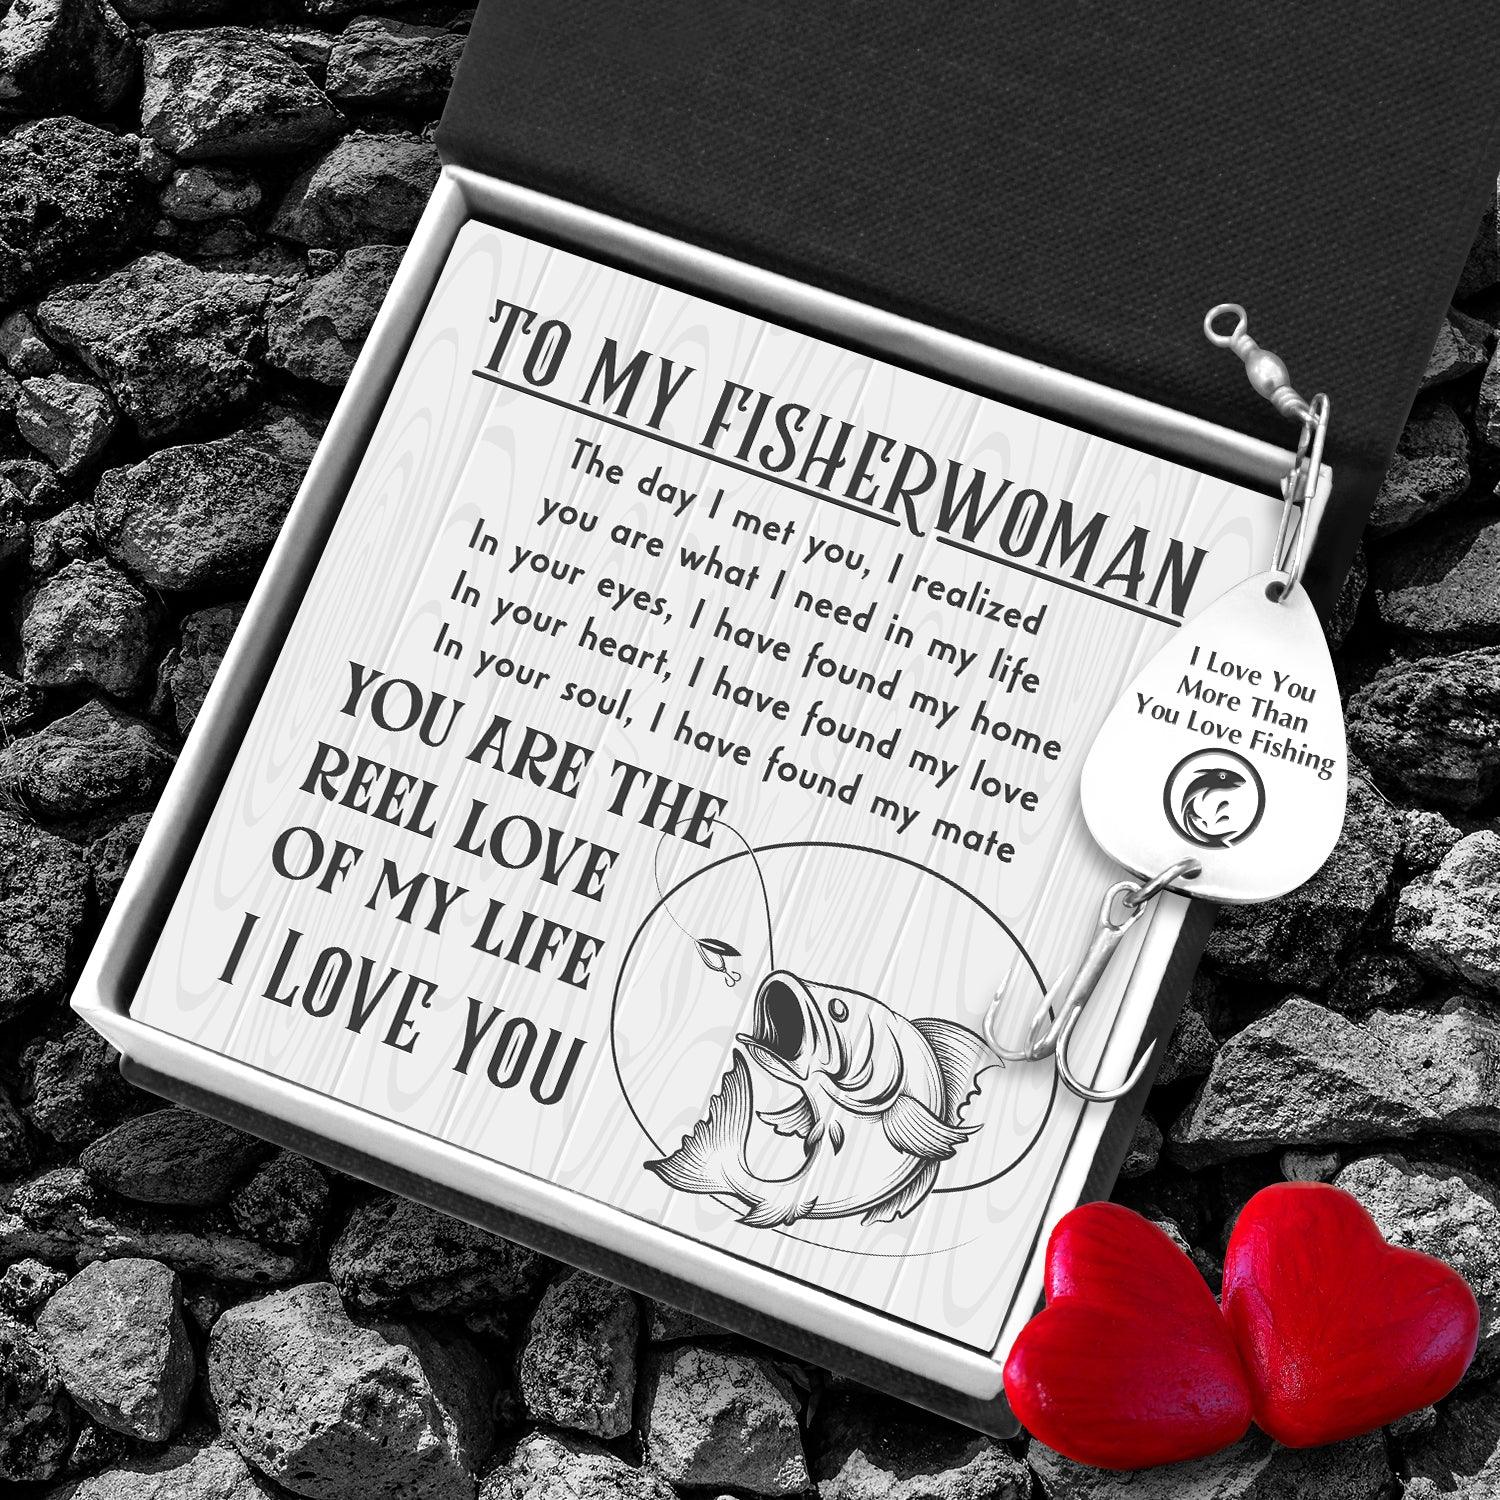 Engraved Fishing Hook - To My Fisherwoman - You Are The Reel Love Of My Life - Augfa13009 - Gifts Holder